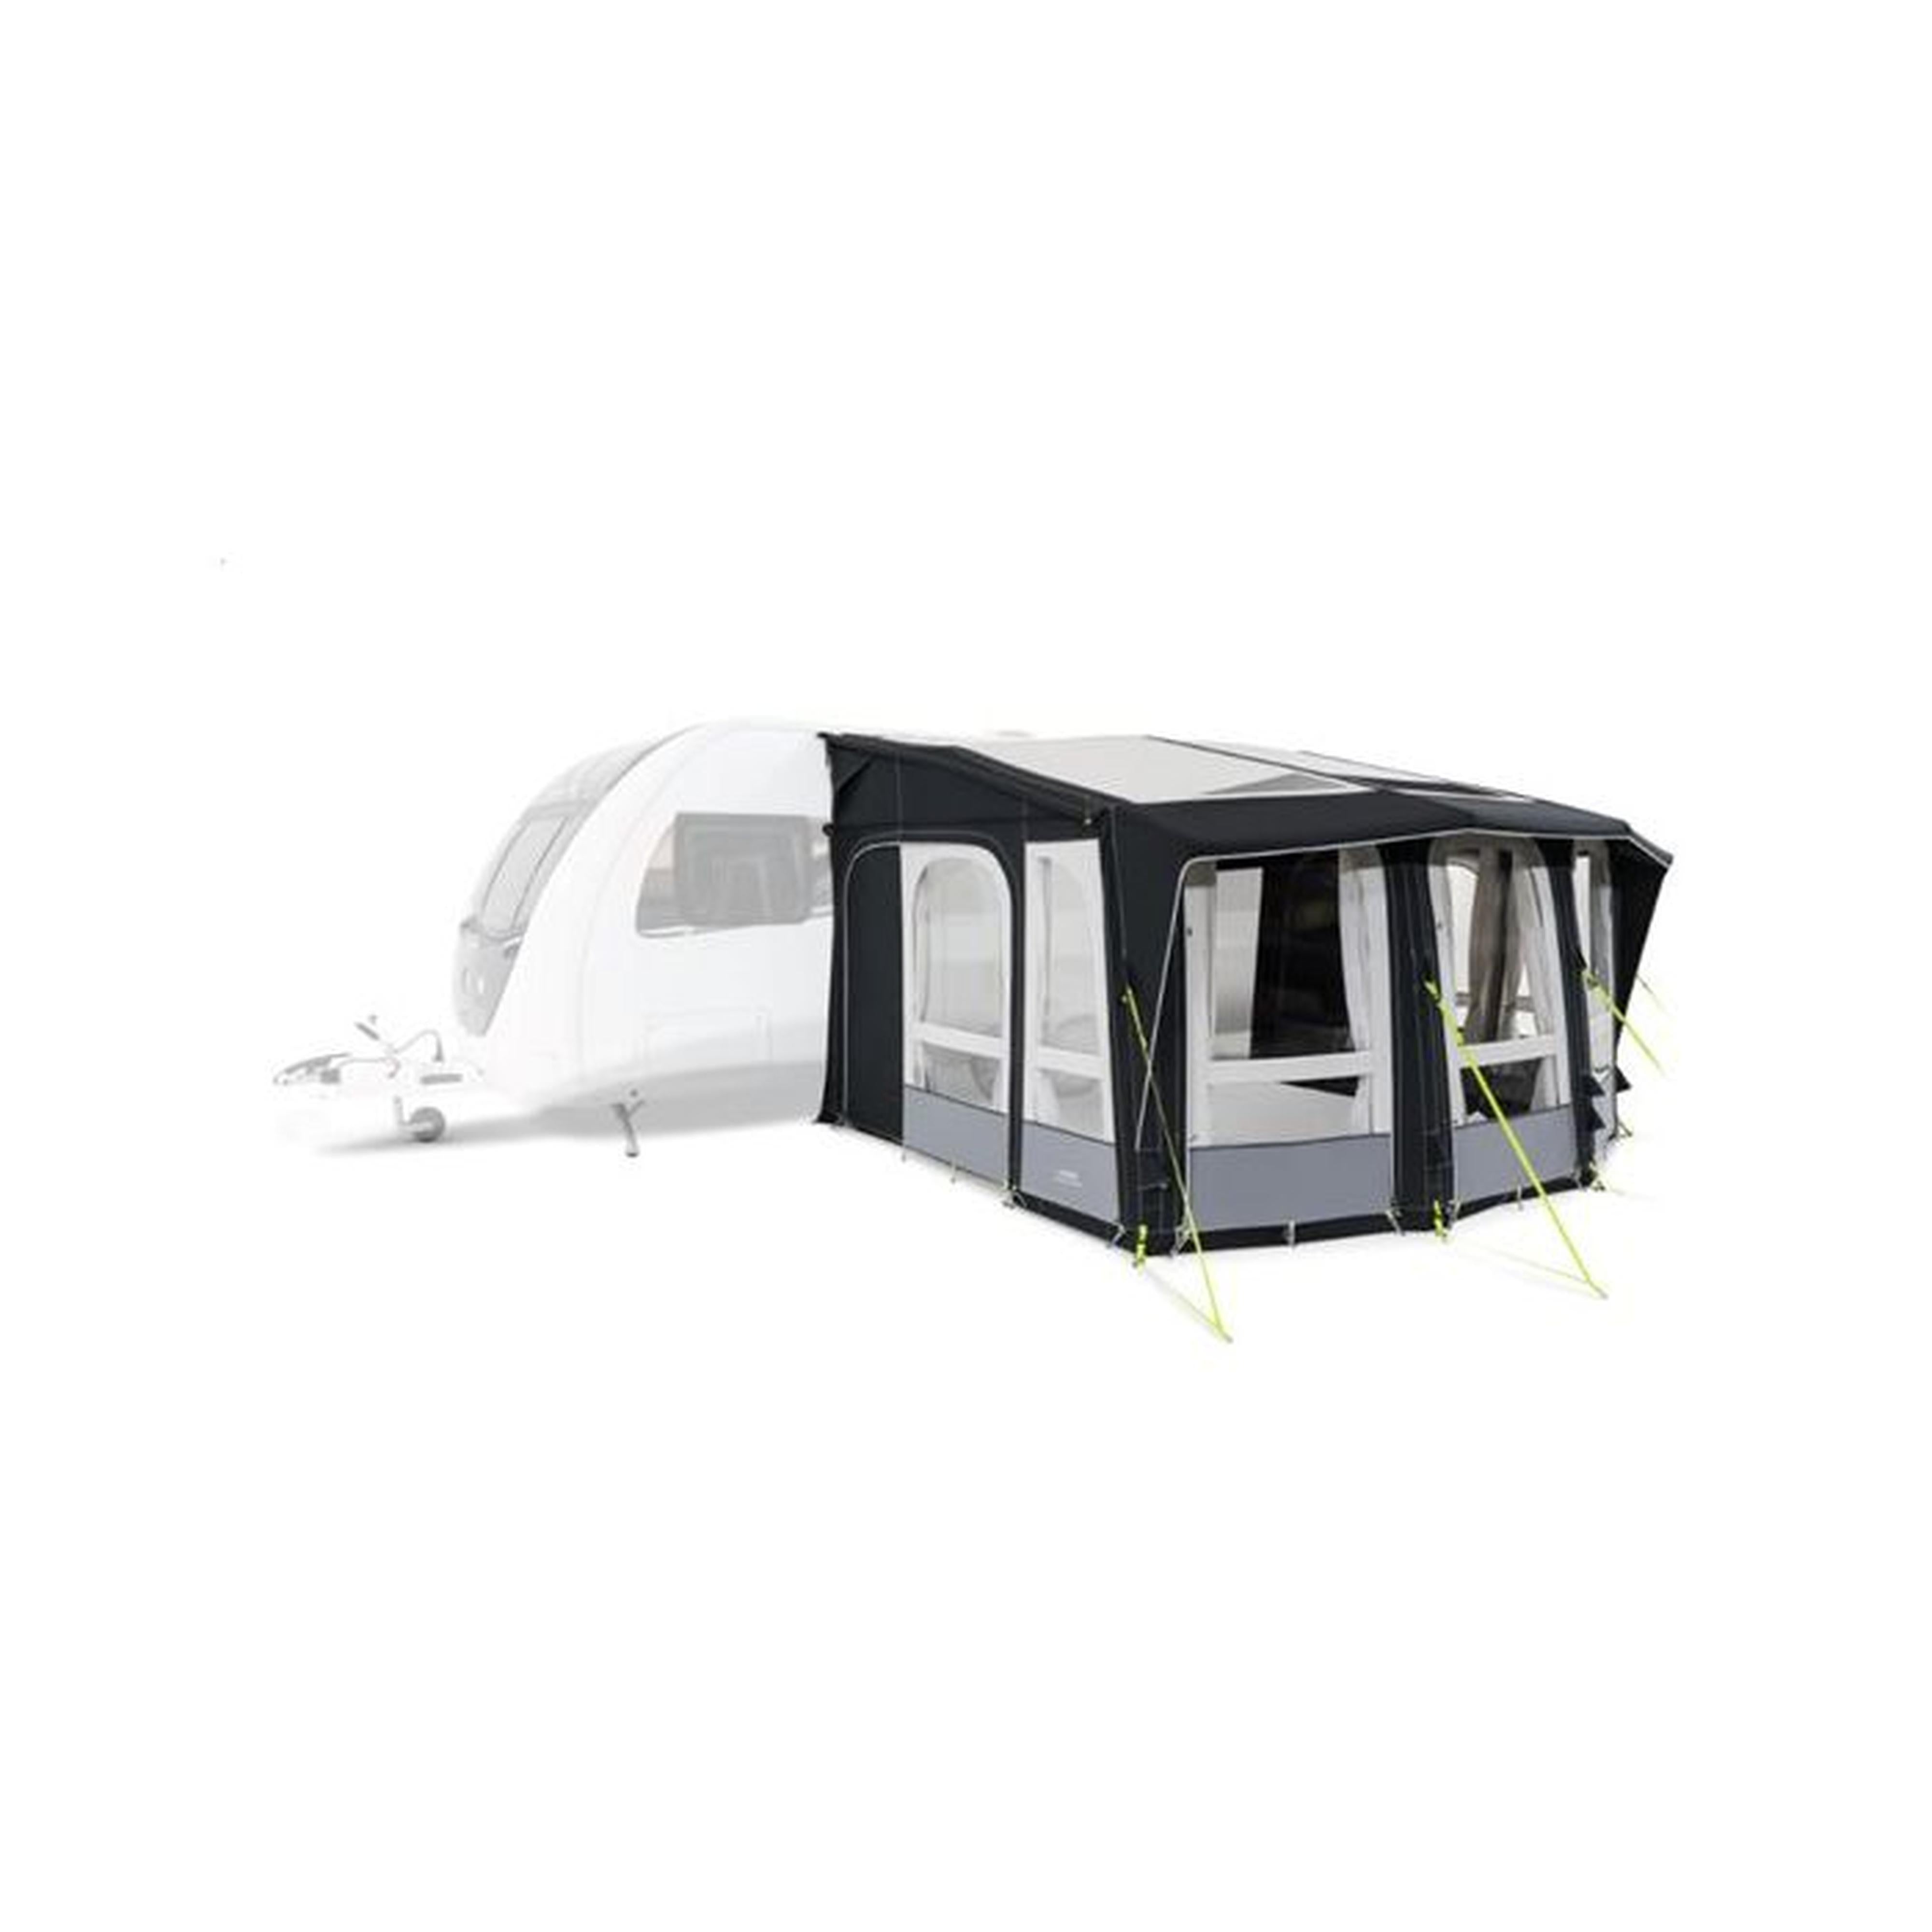 Dometic Ace Air Pro 400 S Awning 2022 Model - outside view